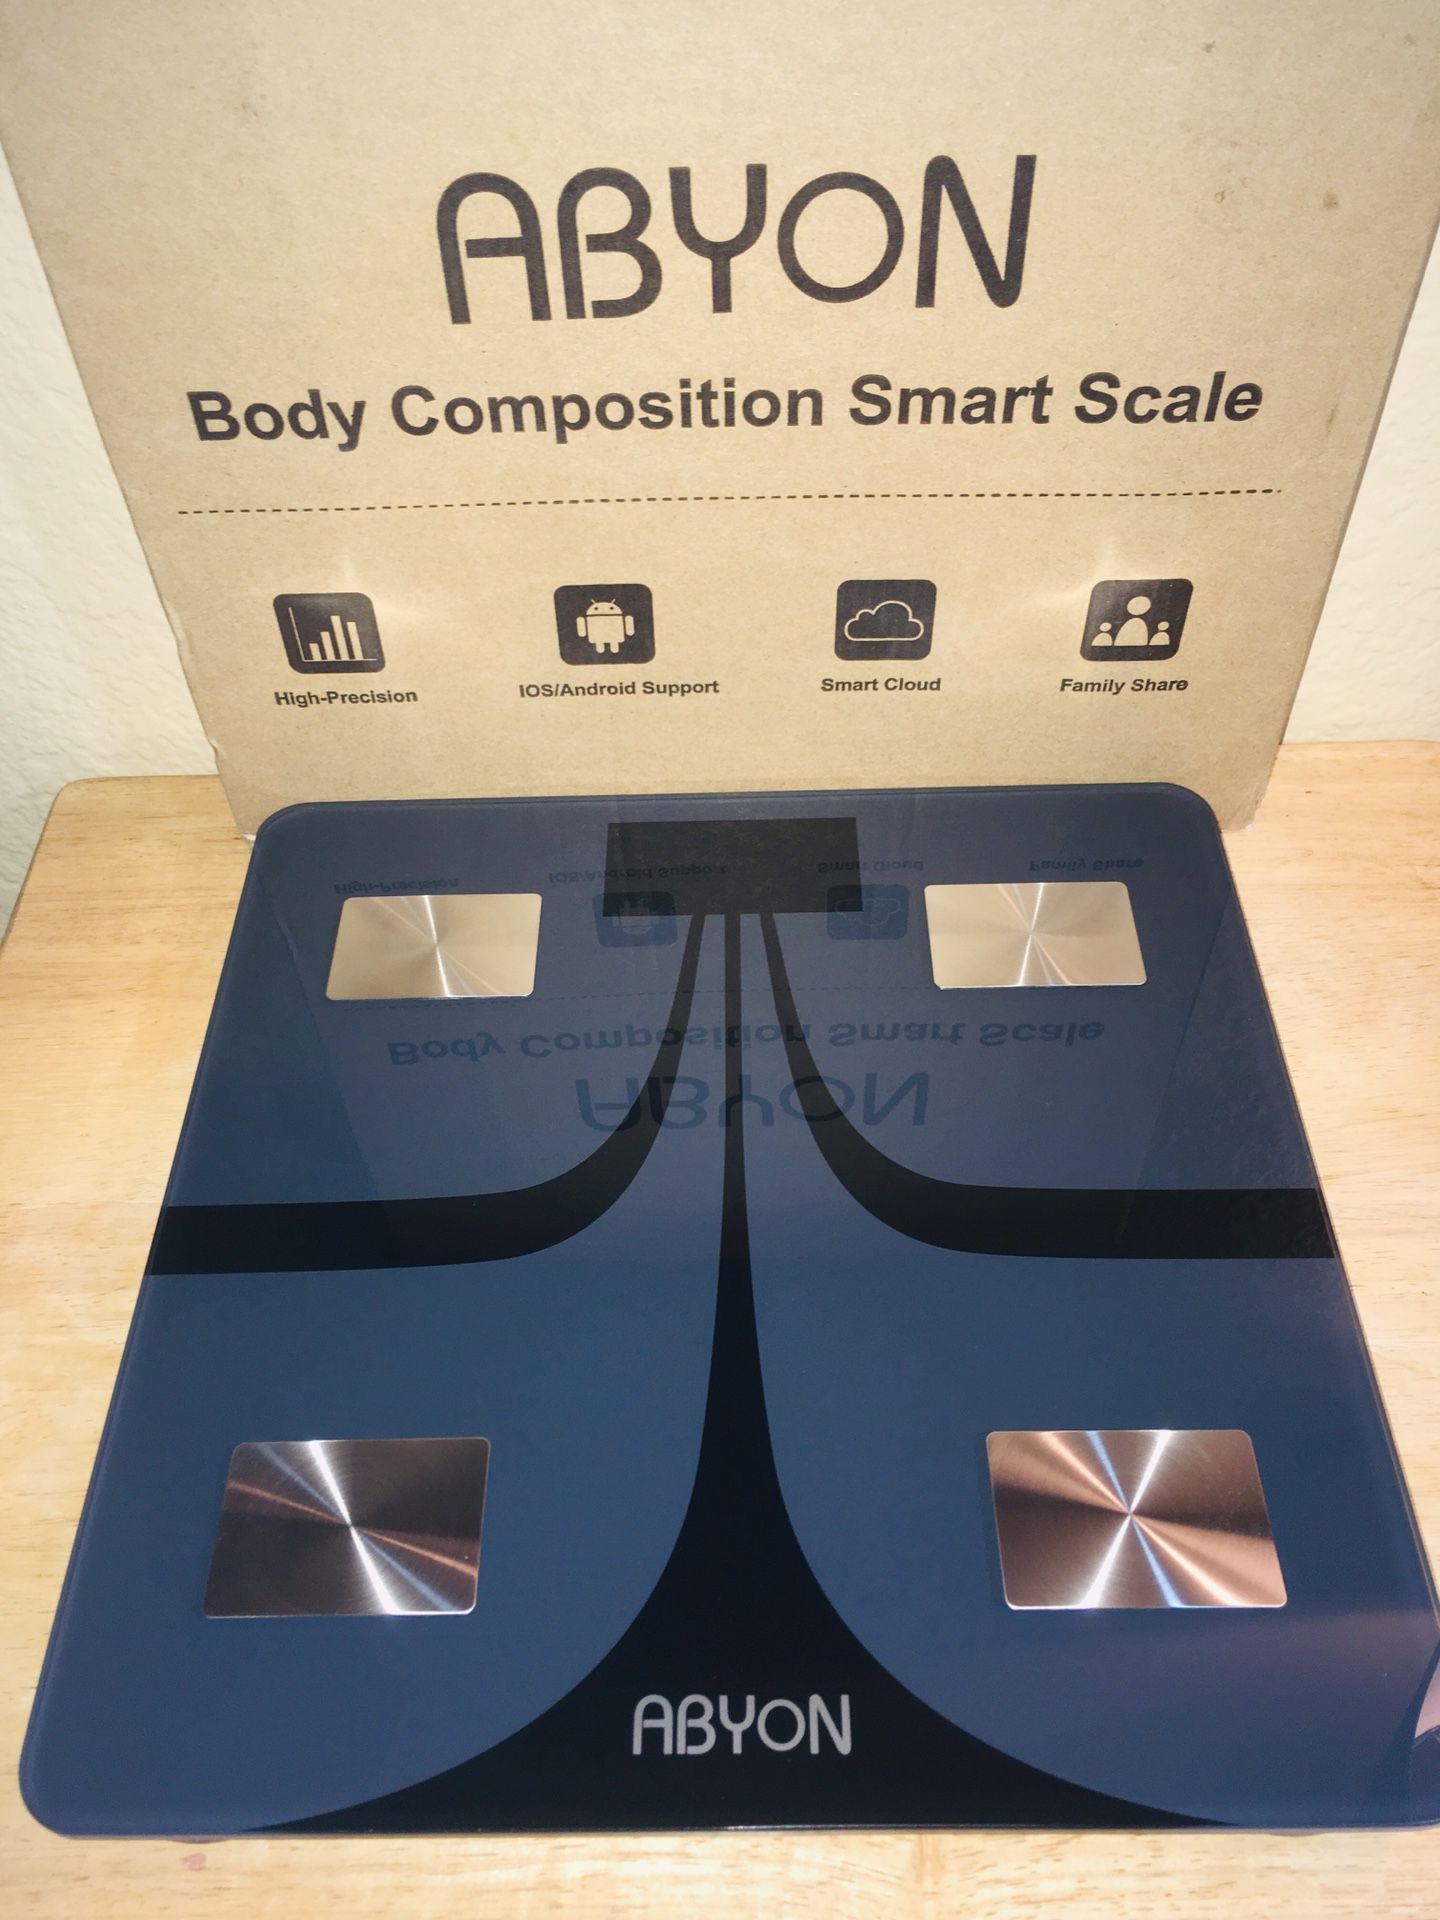 Body composition smart scale